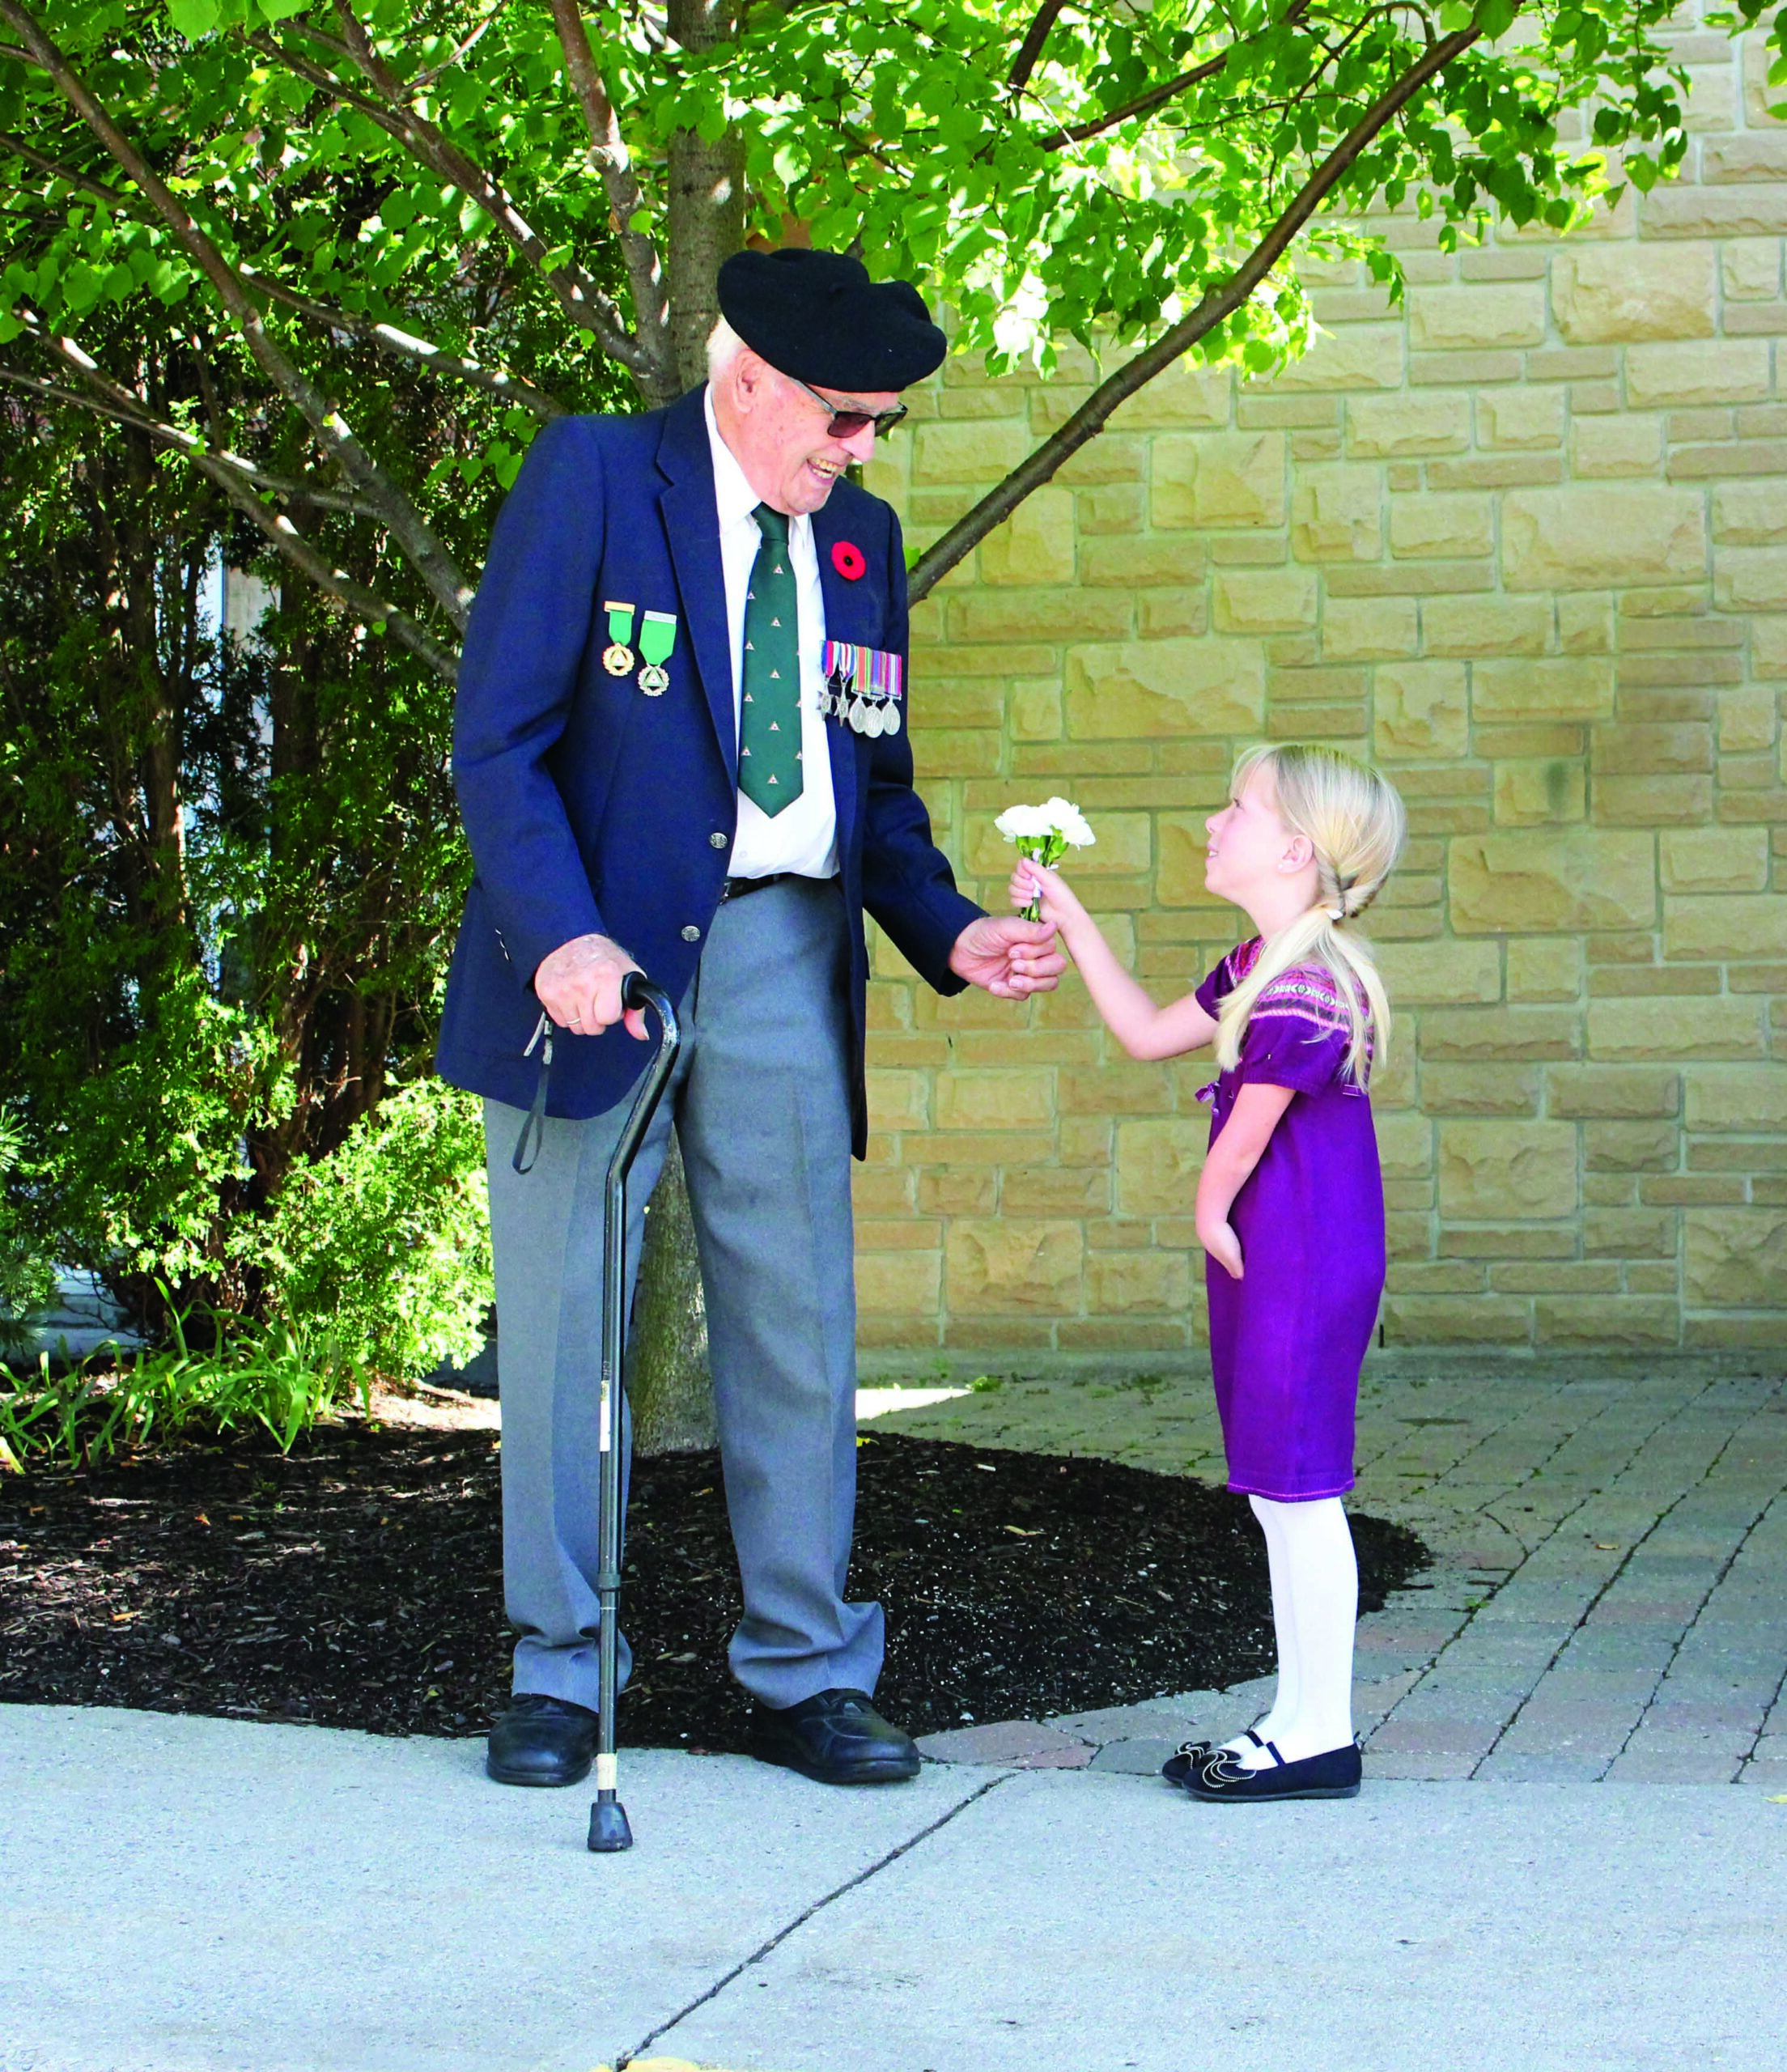 Featured image for Child amputee inspired by WWII veteran